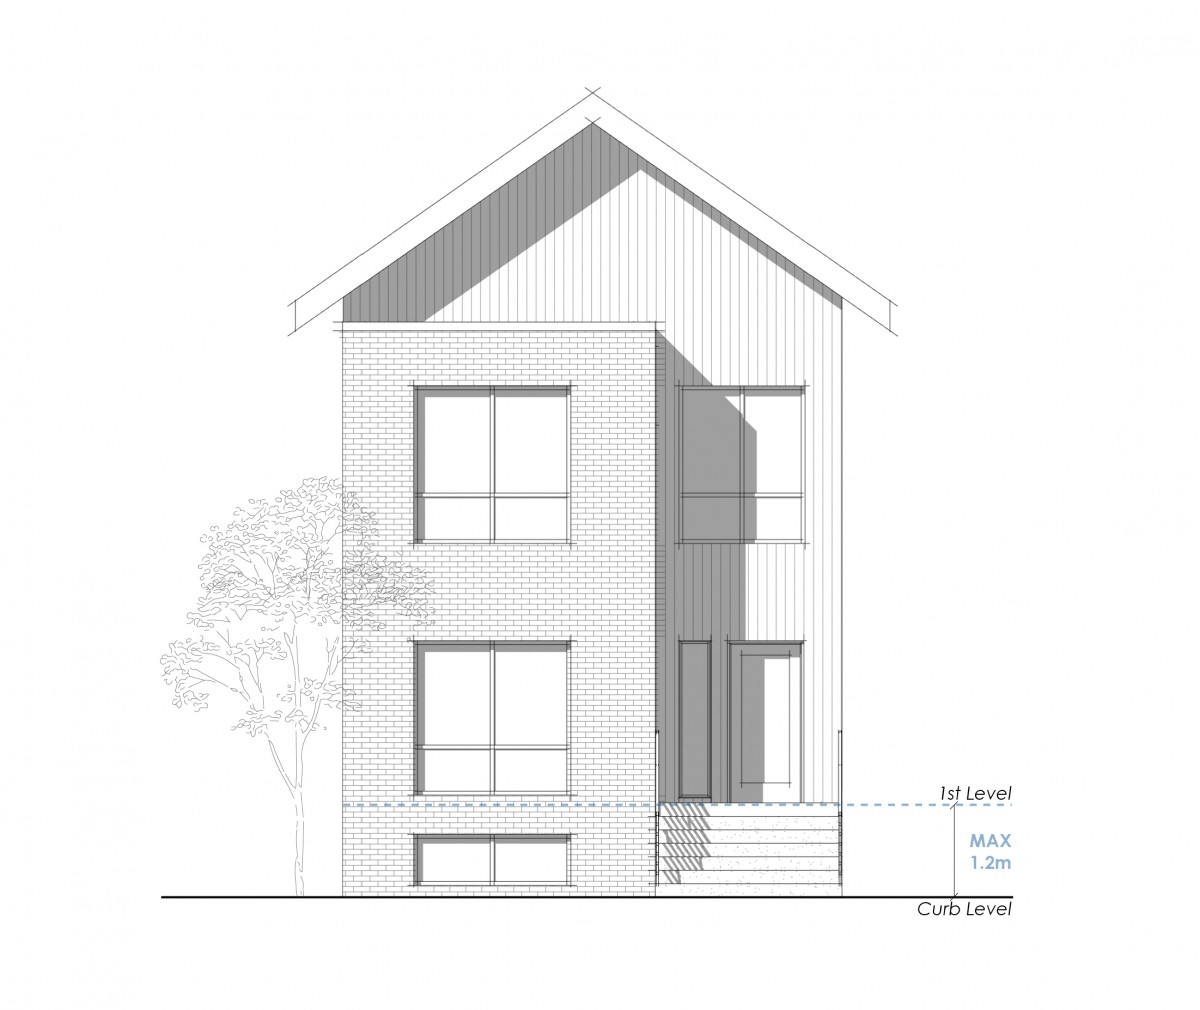 Zoning Bylaw - Figure 5.12 - EXAMPLE OF MAX FLOOR HEIGHT FOR REDUCED GROUND ORIENTED HOUSING SETBACK